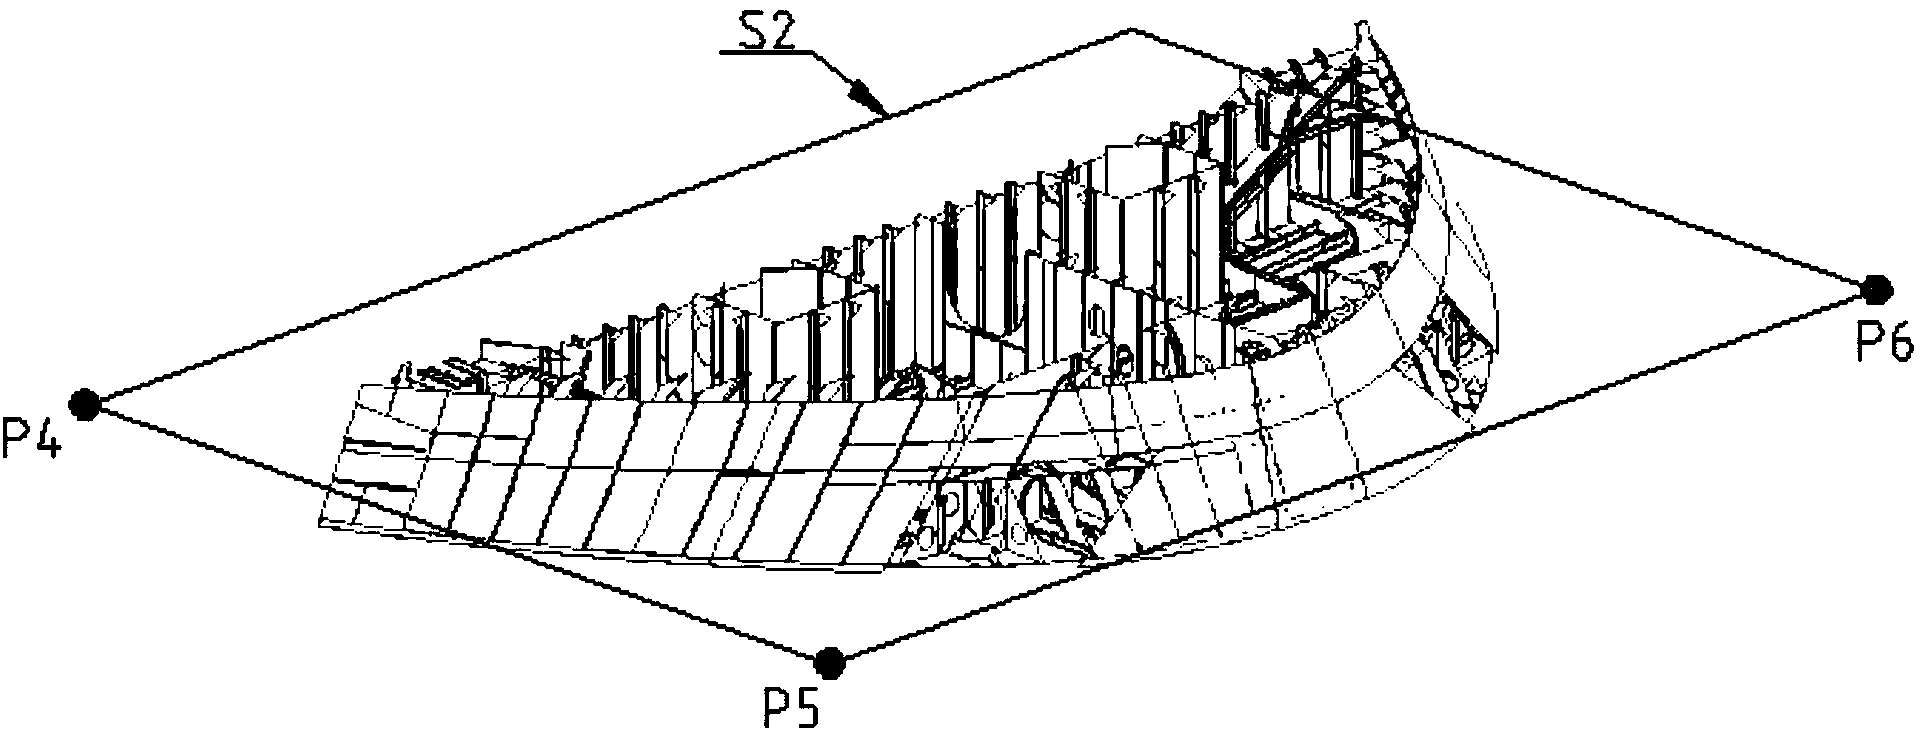 Preassembling method for anchor mouth of bulk frighter in segmentation stage